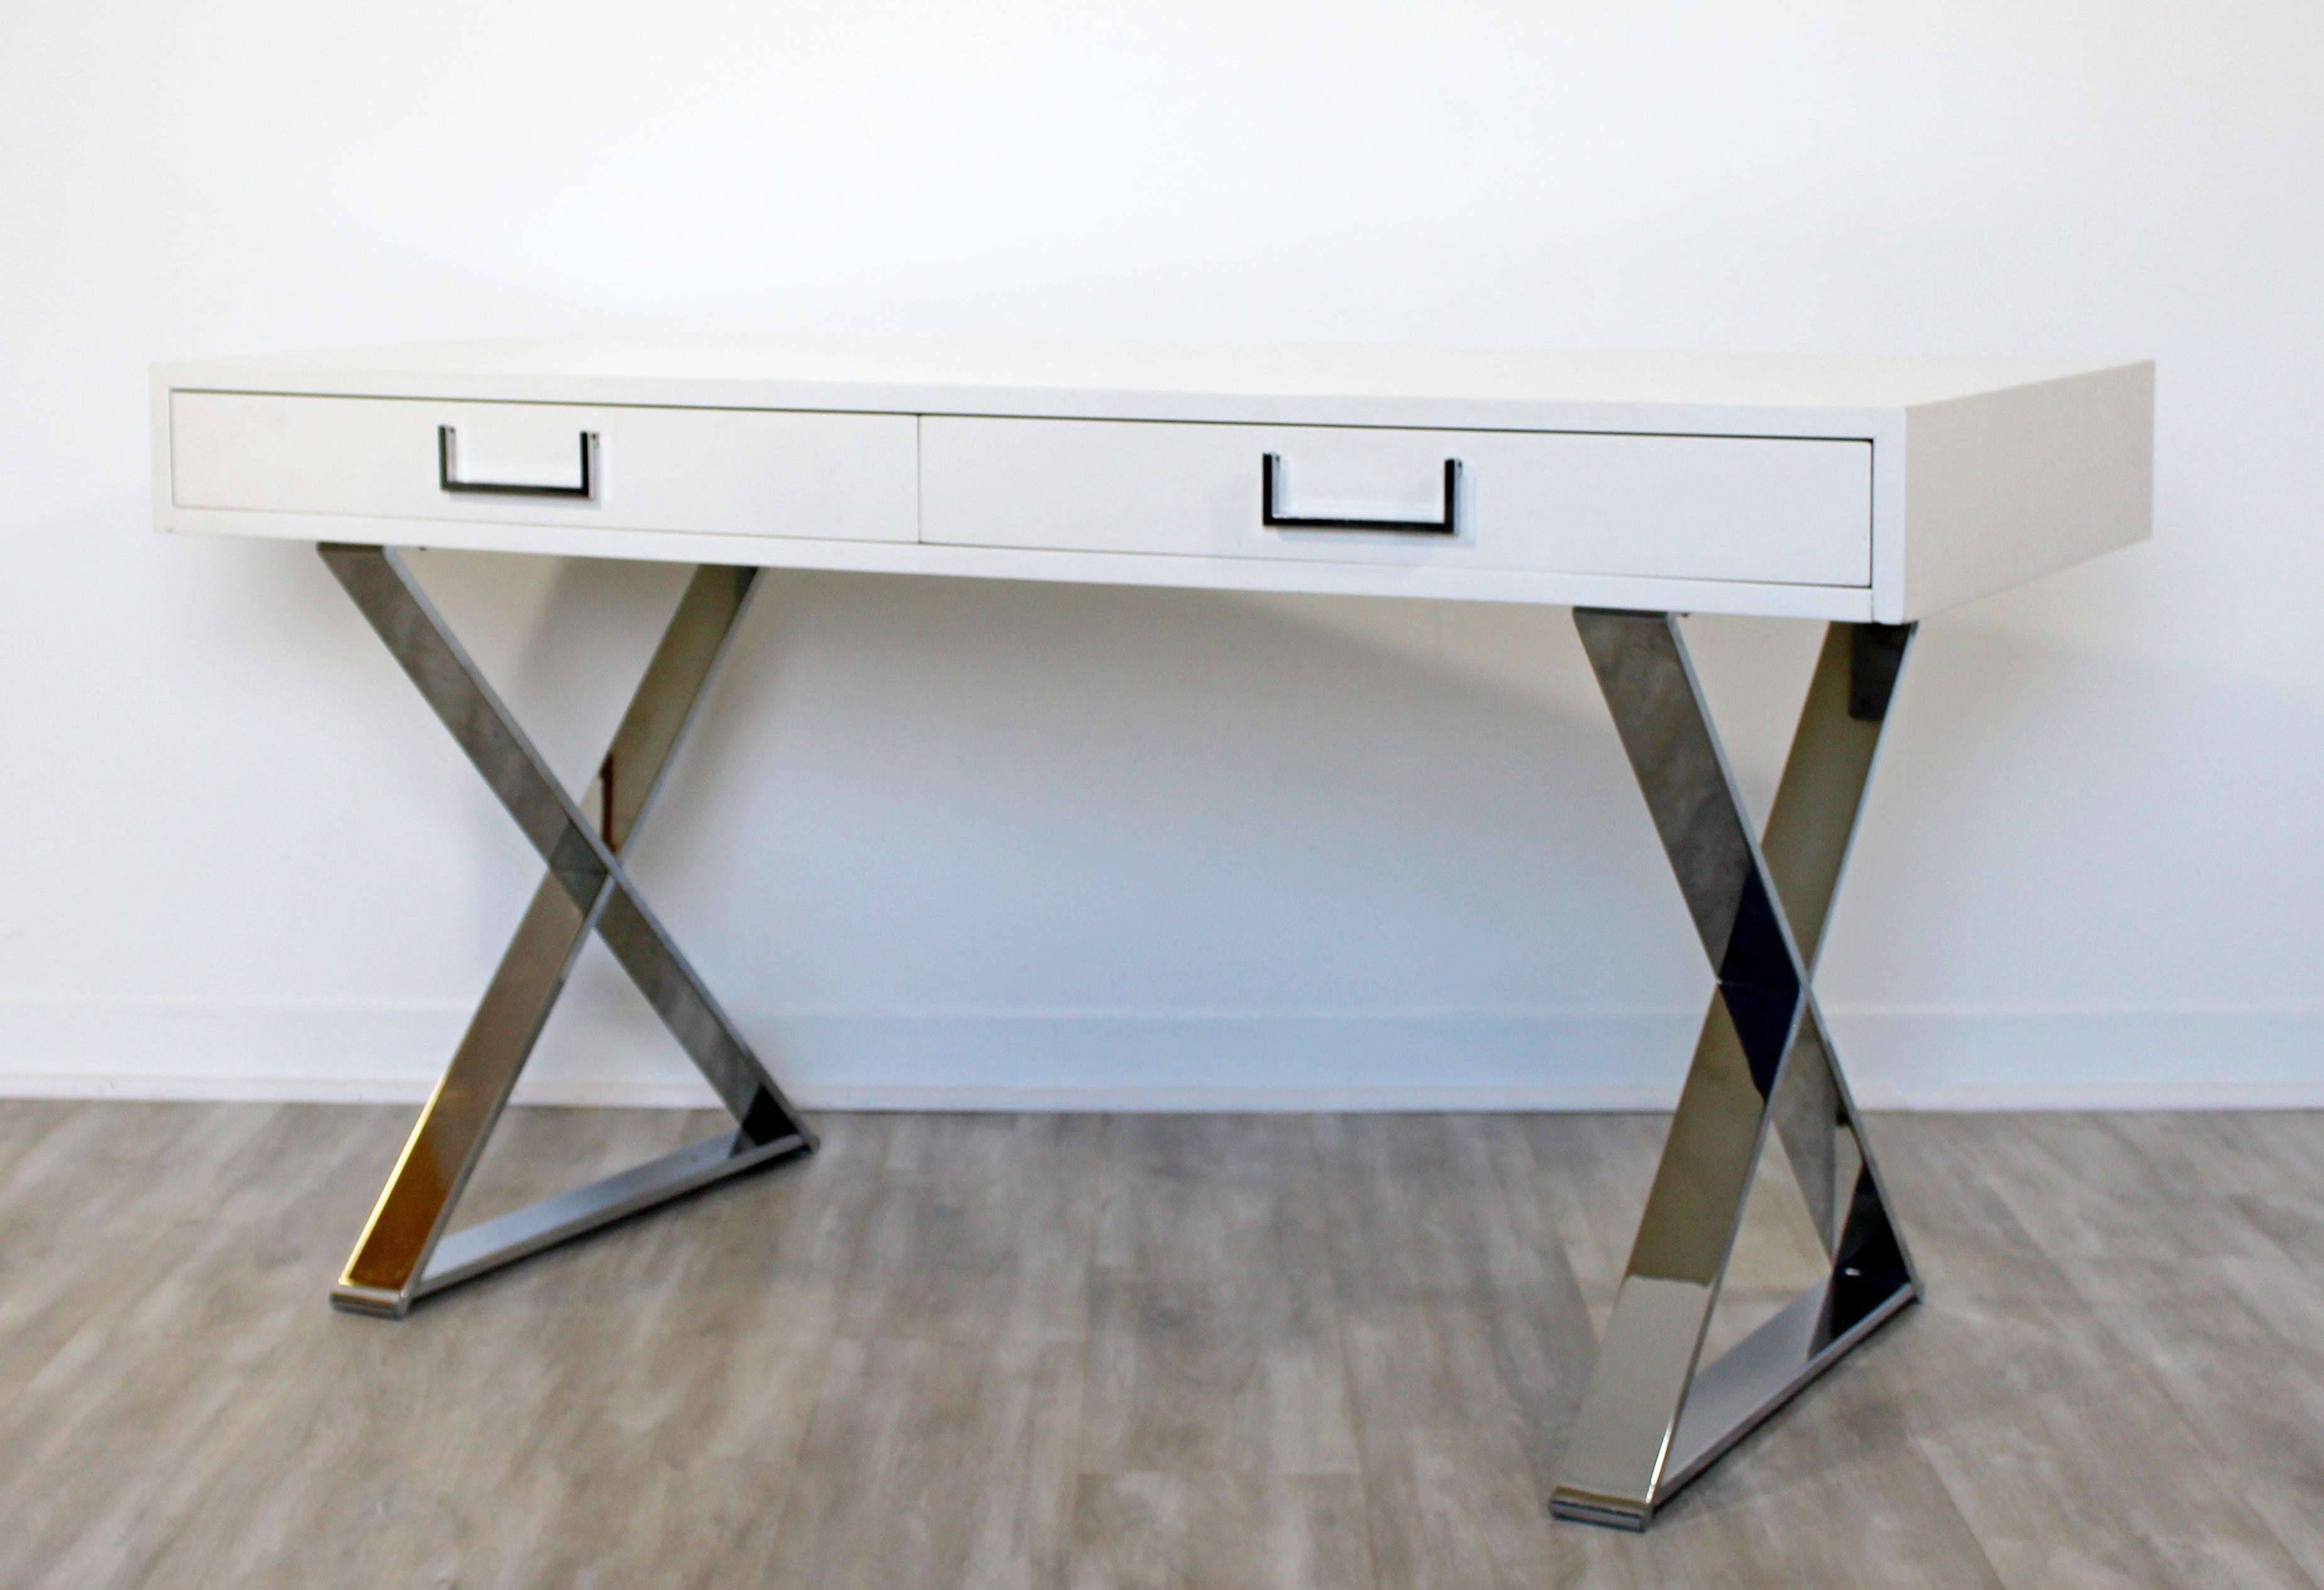 For your consideration is a vivid, white lacquered, Campaign desk, on chrome X bases and with chrome pulls, by Milo Baughman, circa 1960s. In excellent condition. The dimensions are 54